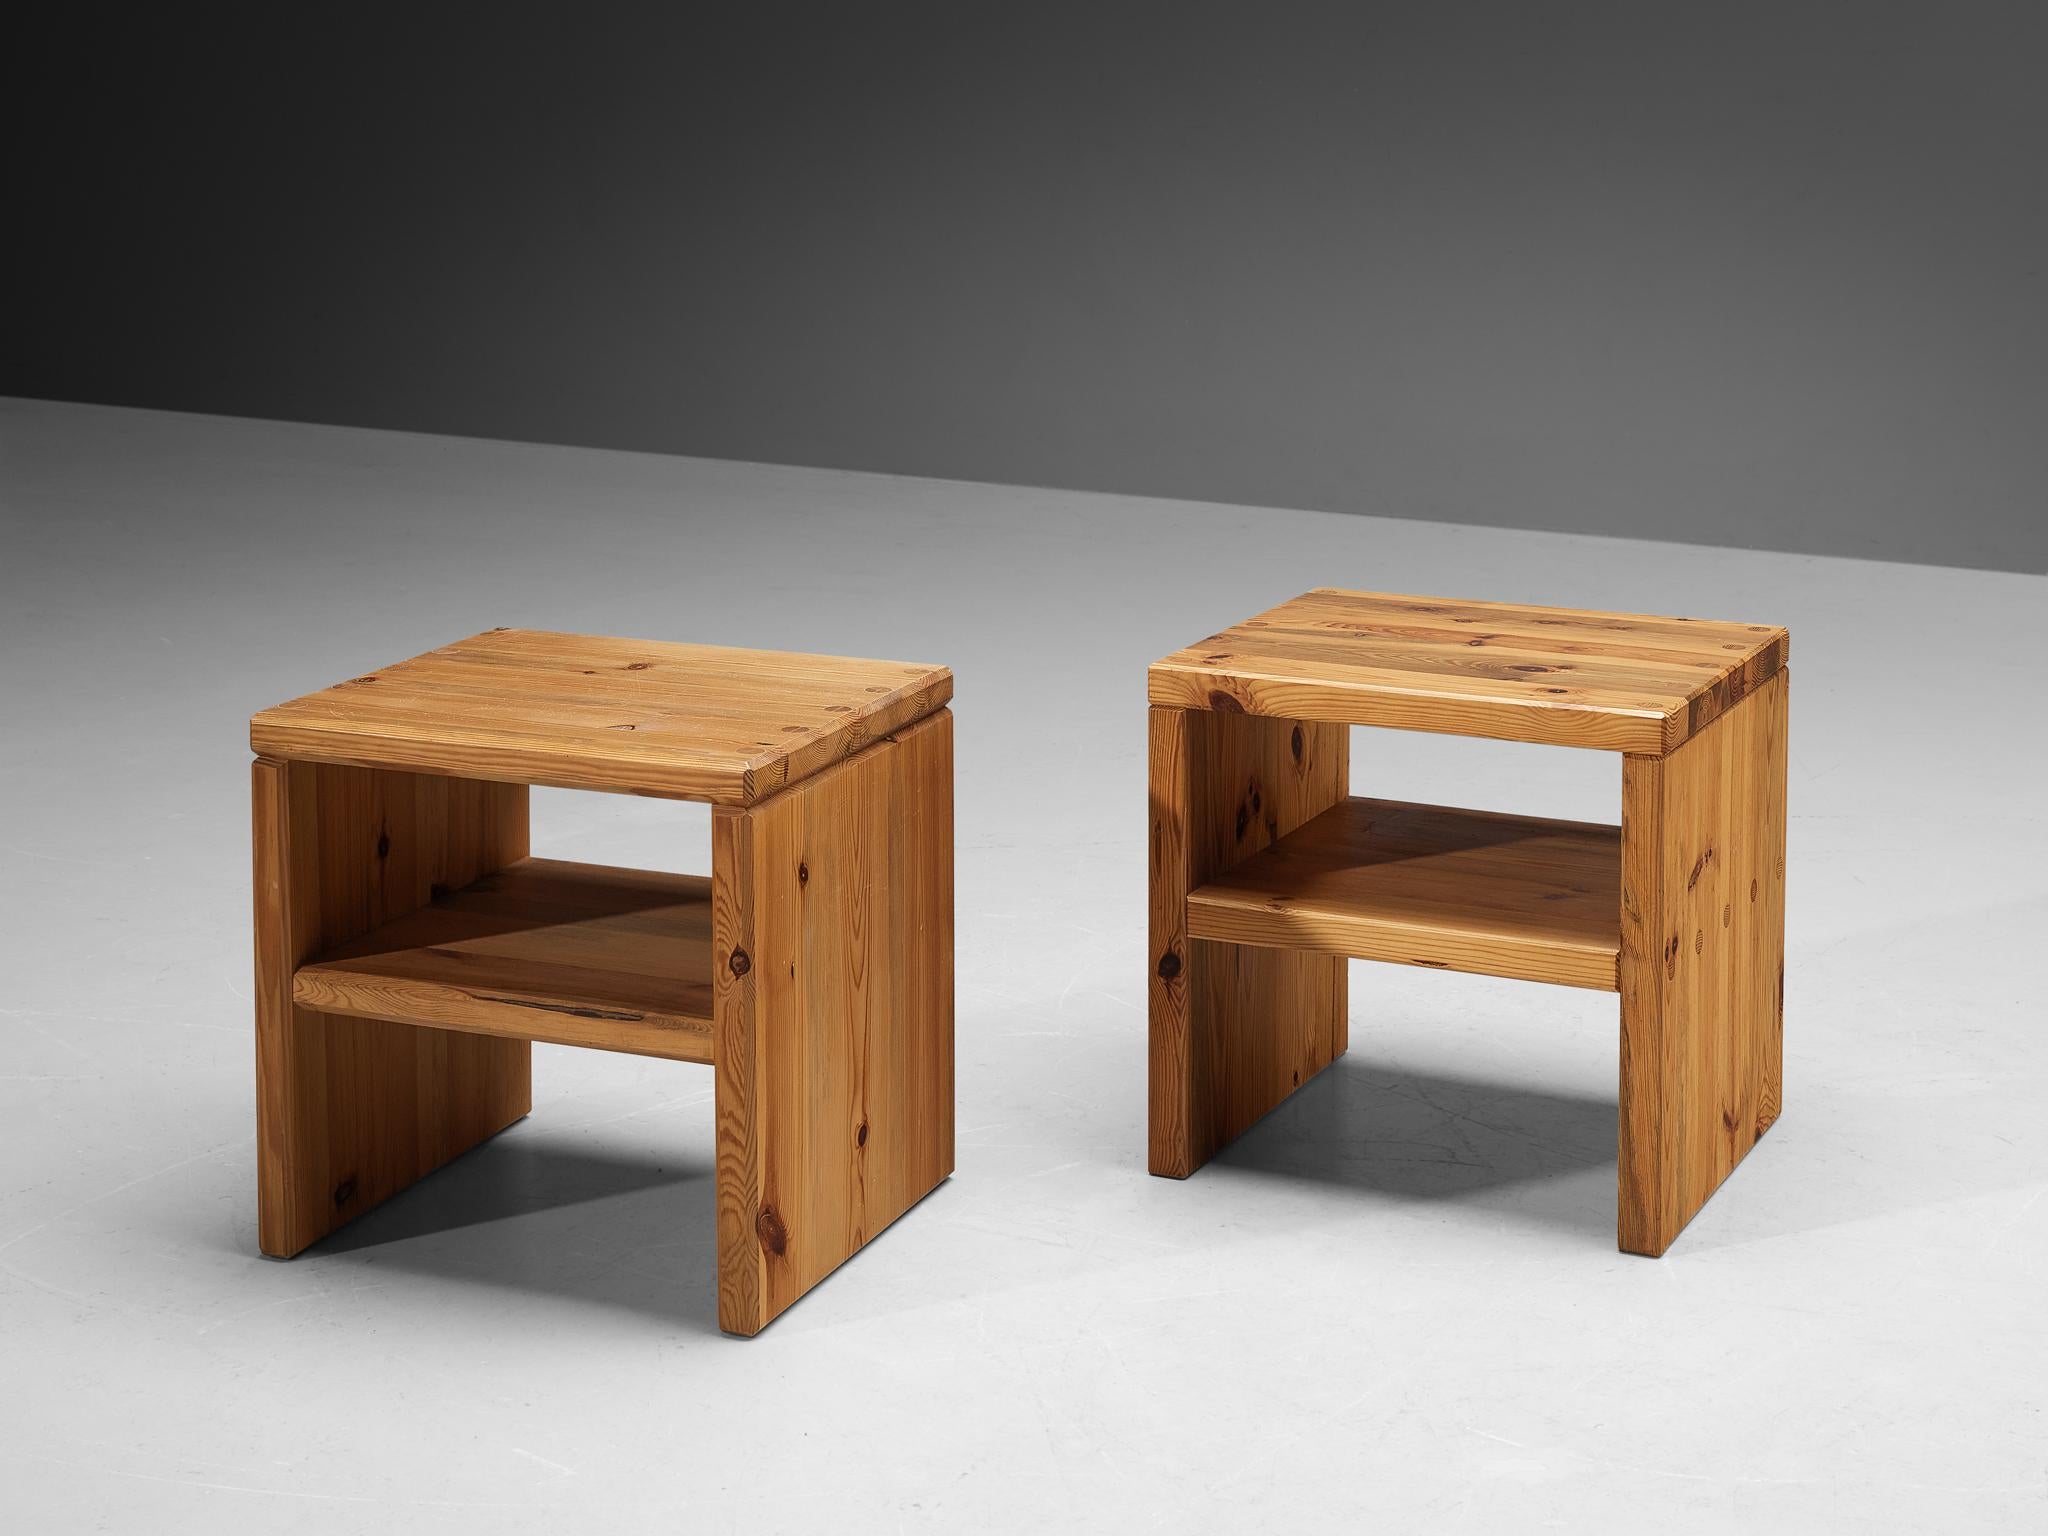 Roland Wilhelmsson for Karl Andersson & Söner, side tables, pine, Sweden, 1970s
 
This pair of side tables with a solid and sturdy look are constructed in a precise manner implementing straight lines, resulting in an eloquent and simplistic